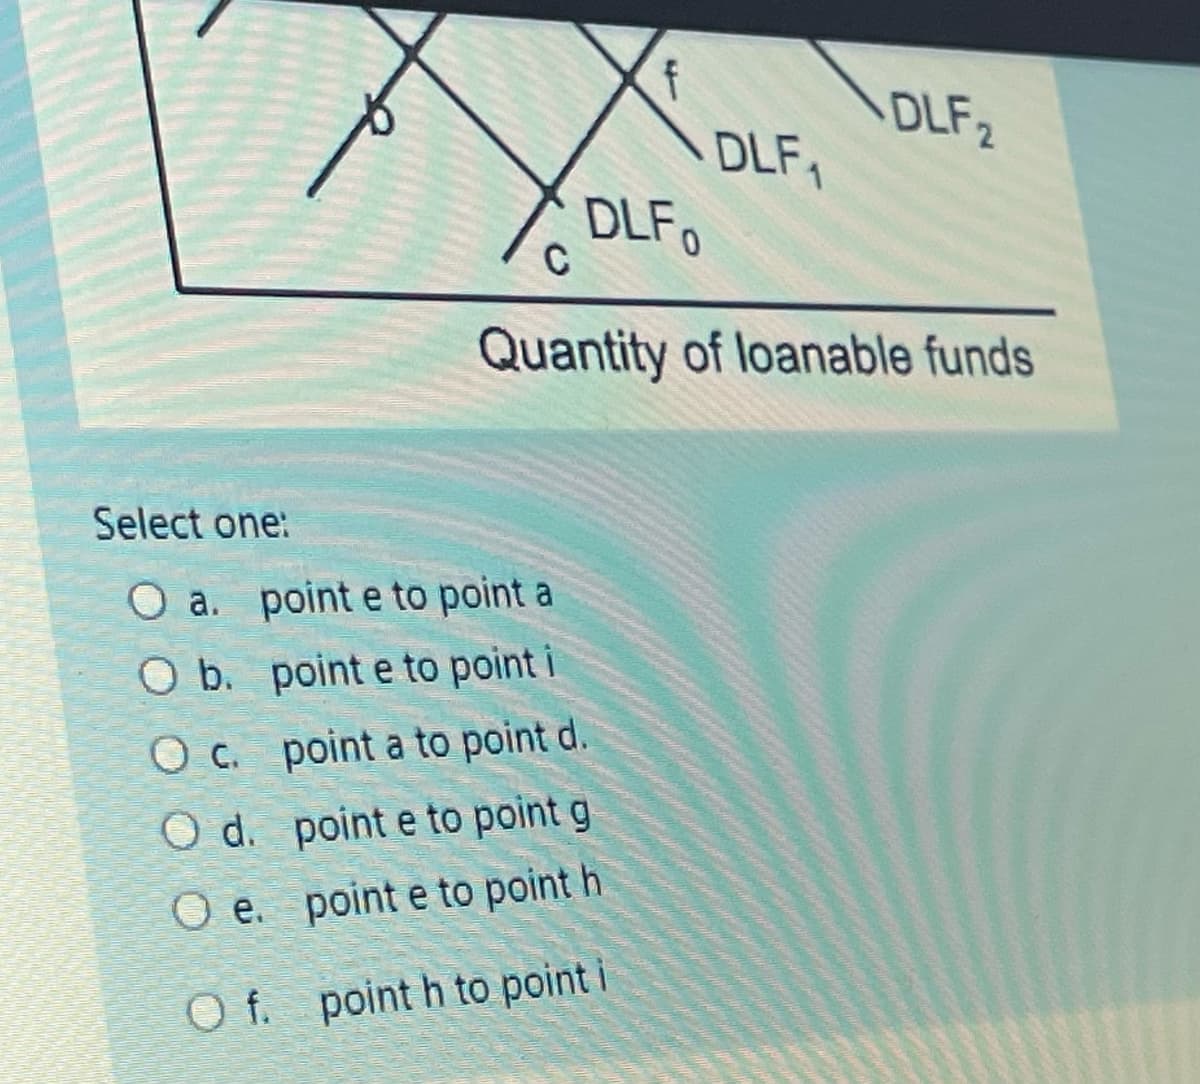 f
Select one:
O a. point e to point a
O b.
point e to point i
O c.
point a to point d.
O d.
point e to point g
e.
point e to point h
O f.
point h to point i
DLFo
DLF
DLF ₂
C
Quantity of loanable funds